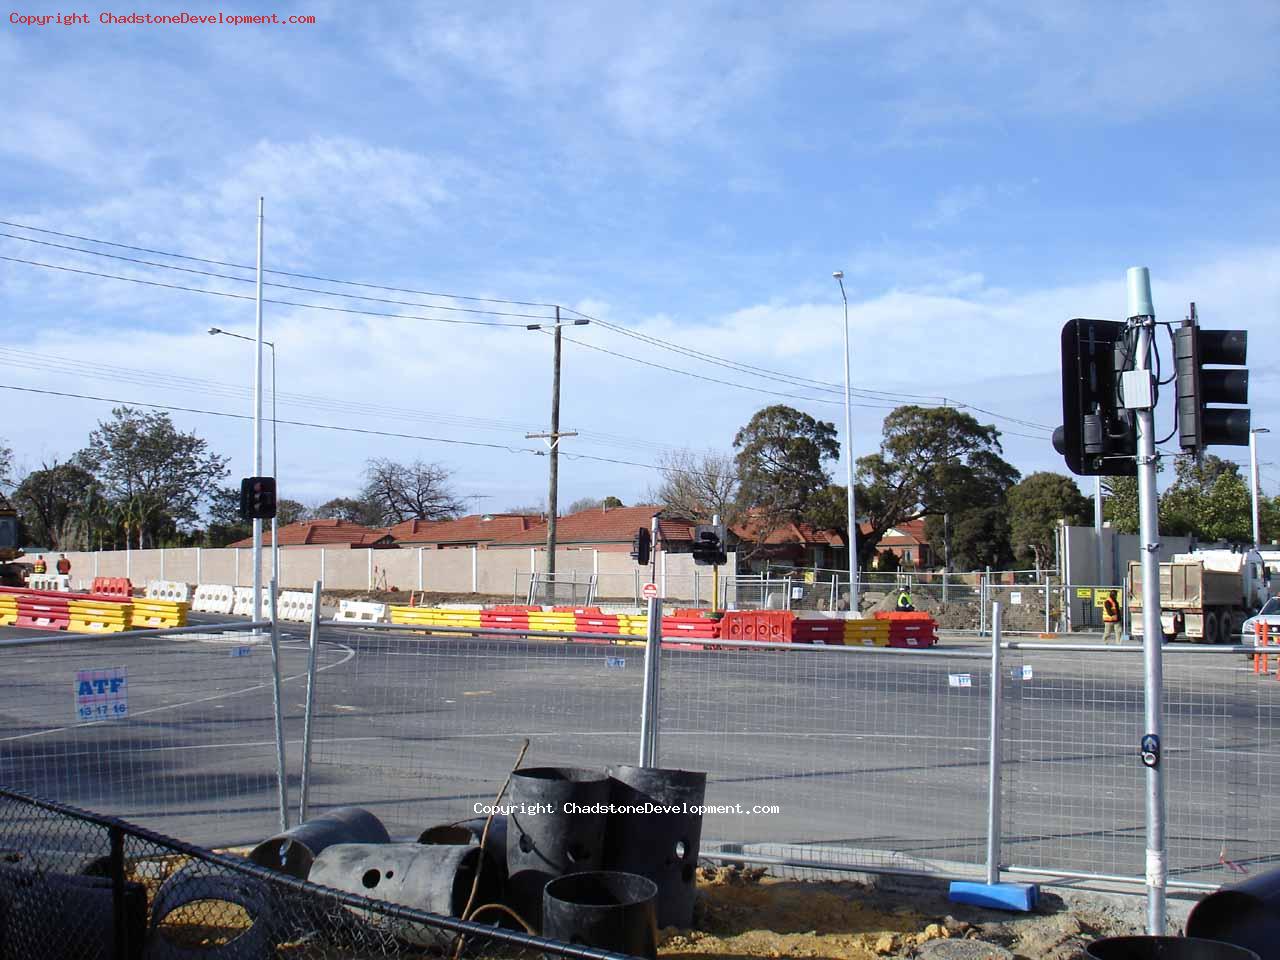 The Middle/Capon intersection, viewed from multi-level carpark - Chadstone Development Discussions